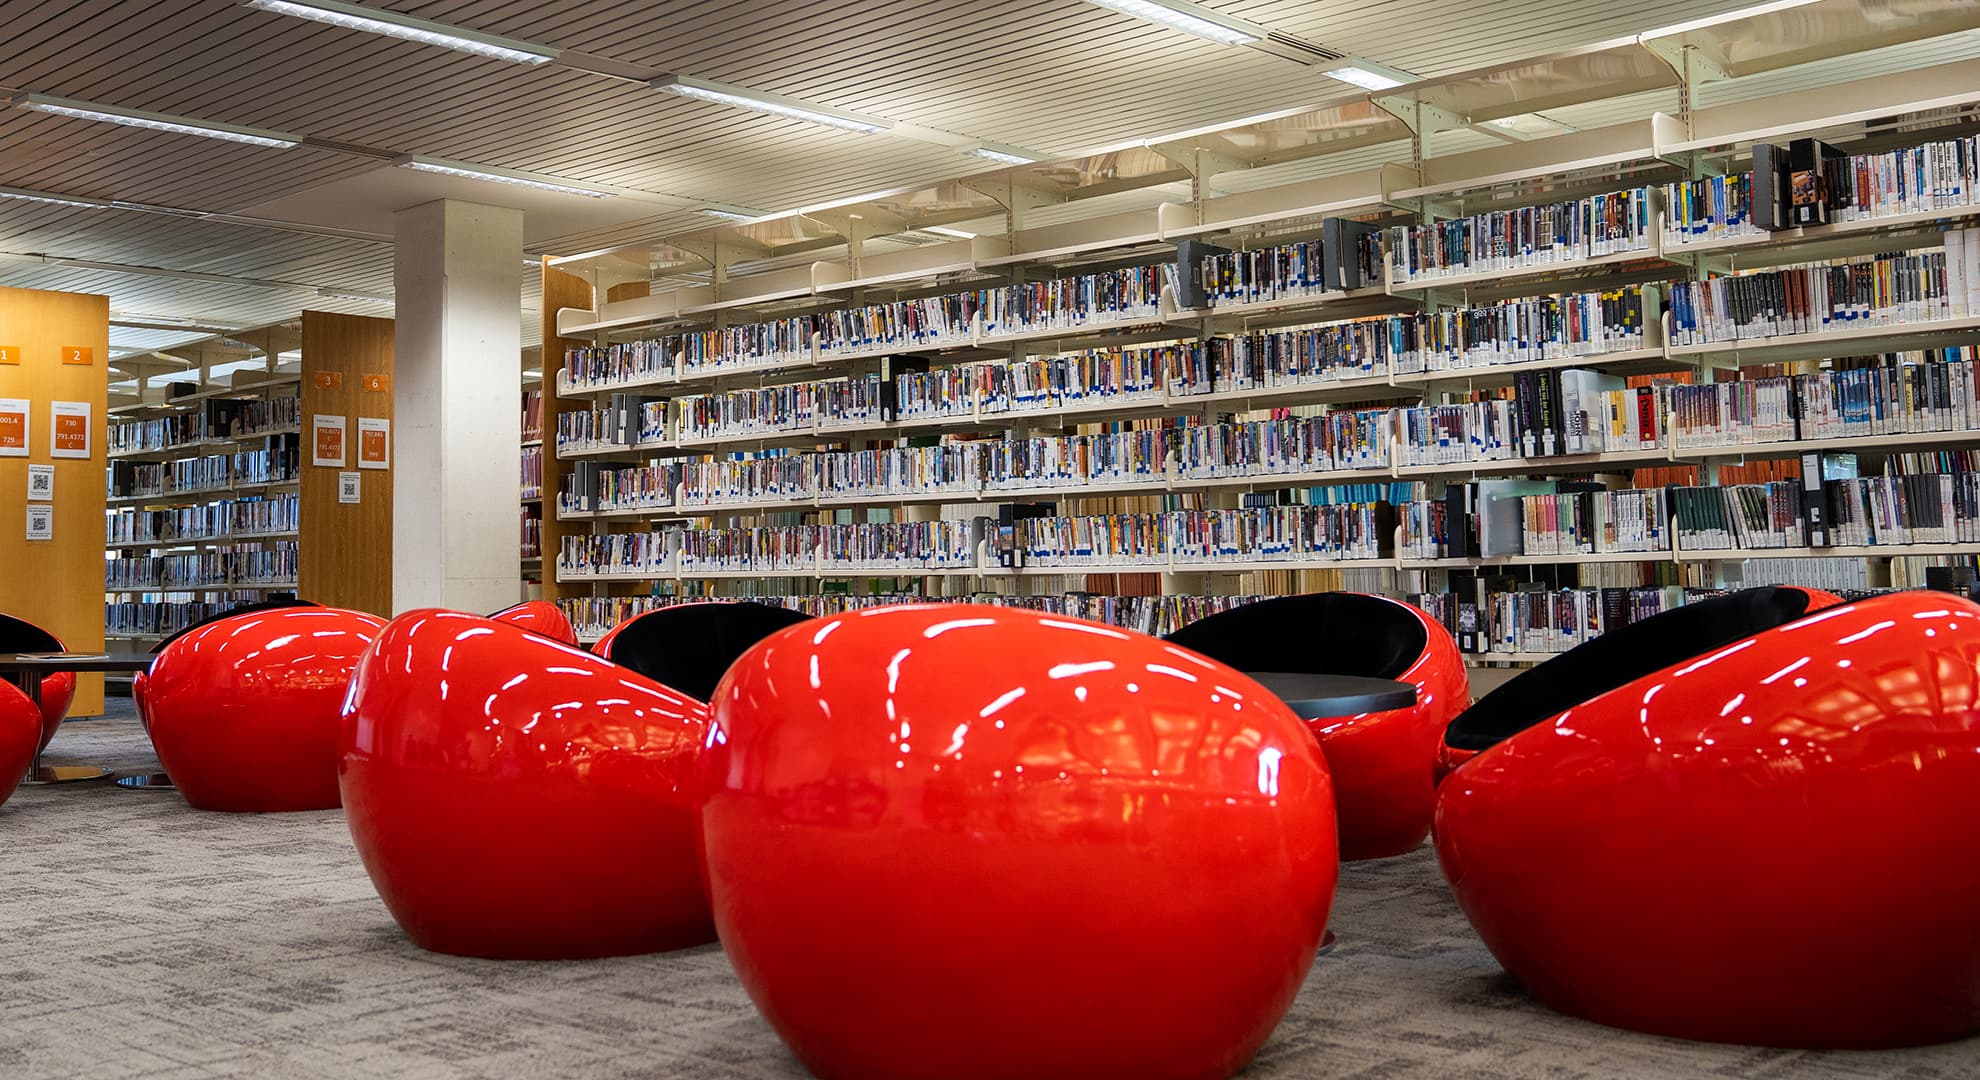 Racks of books behind bright red plastic chairs